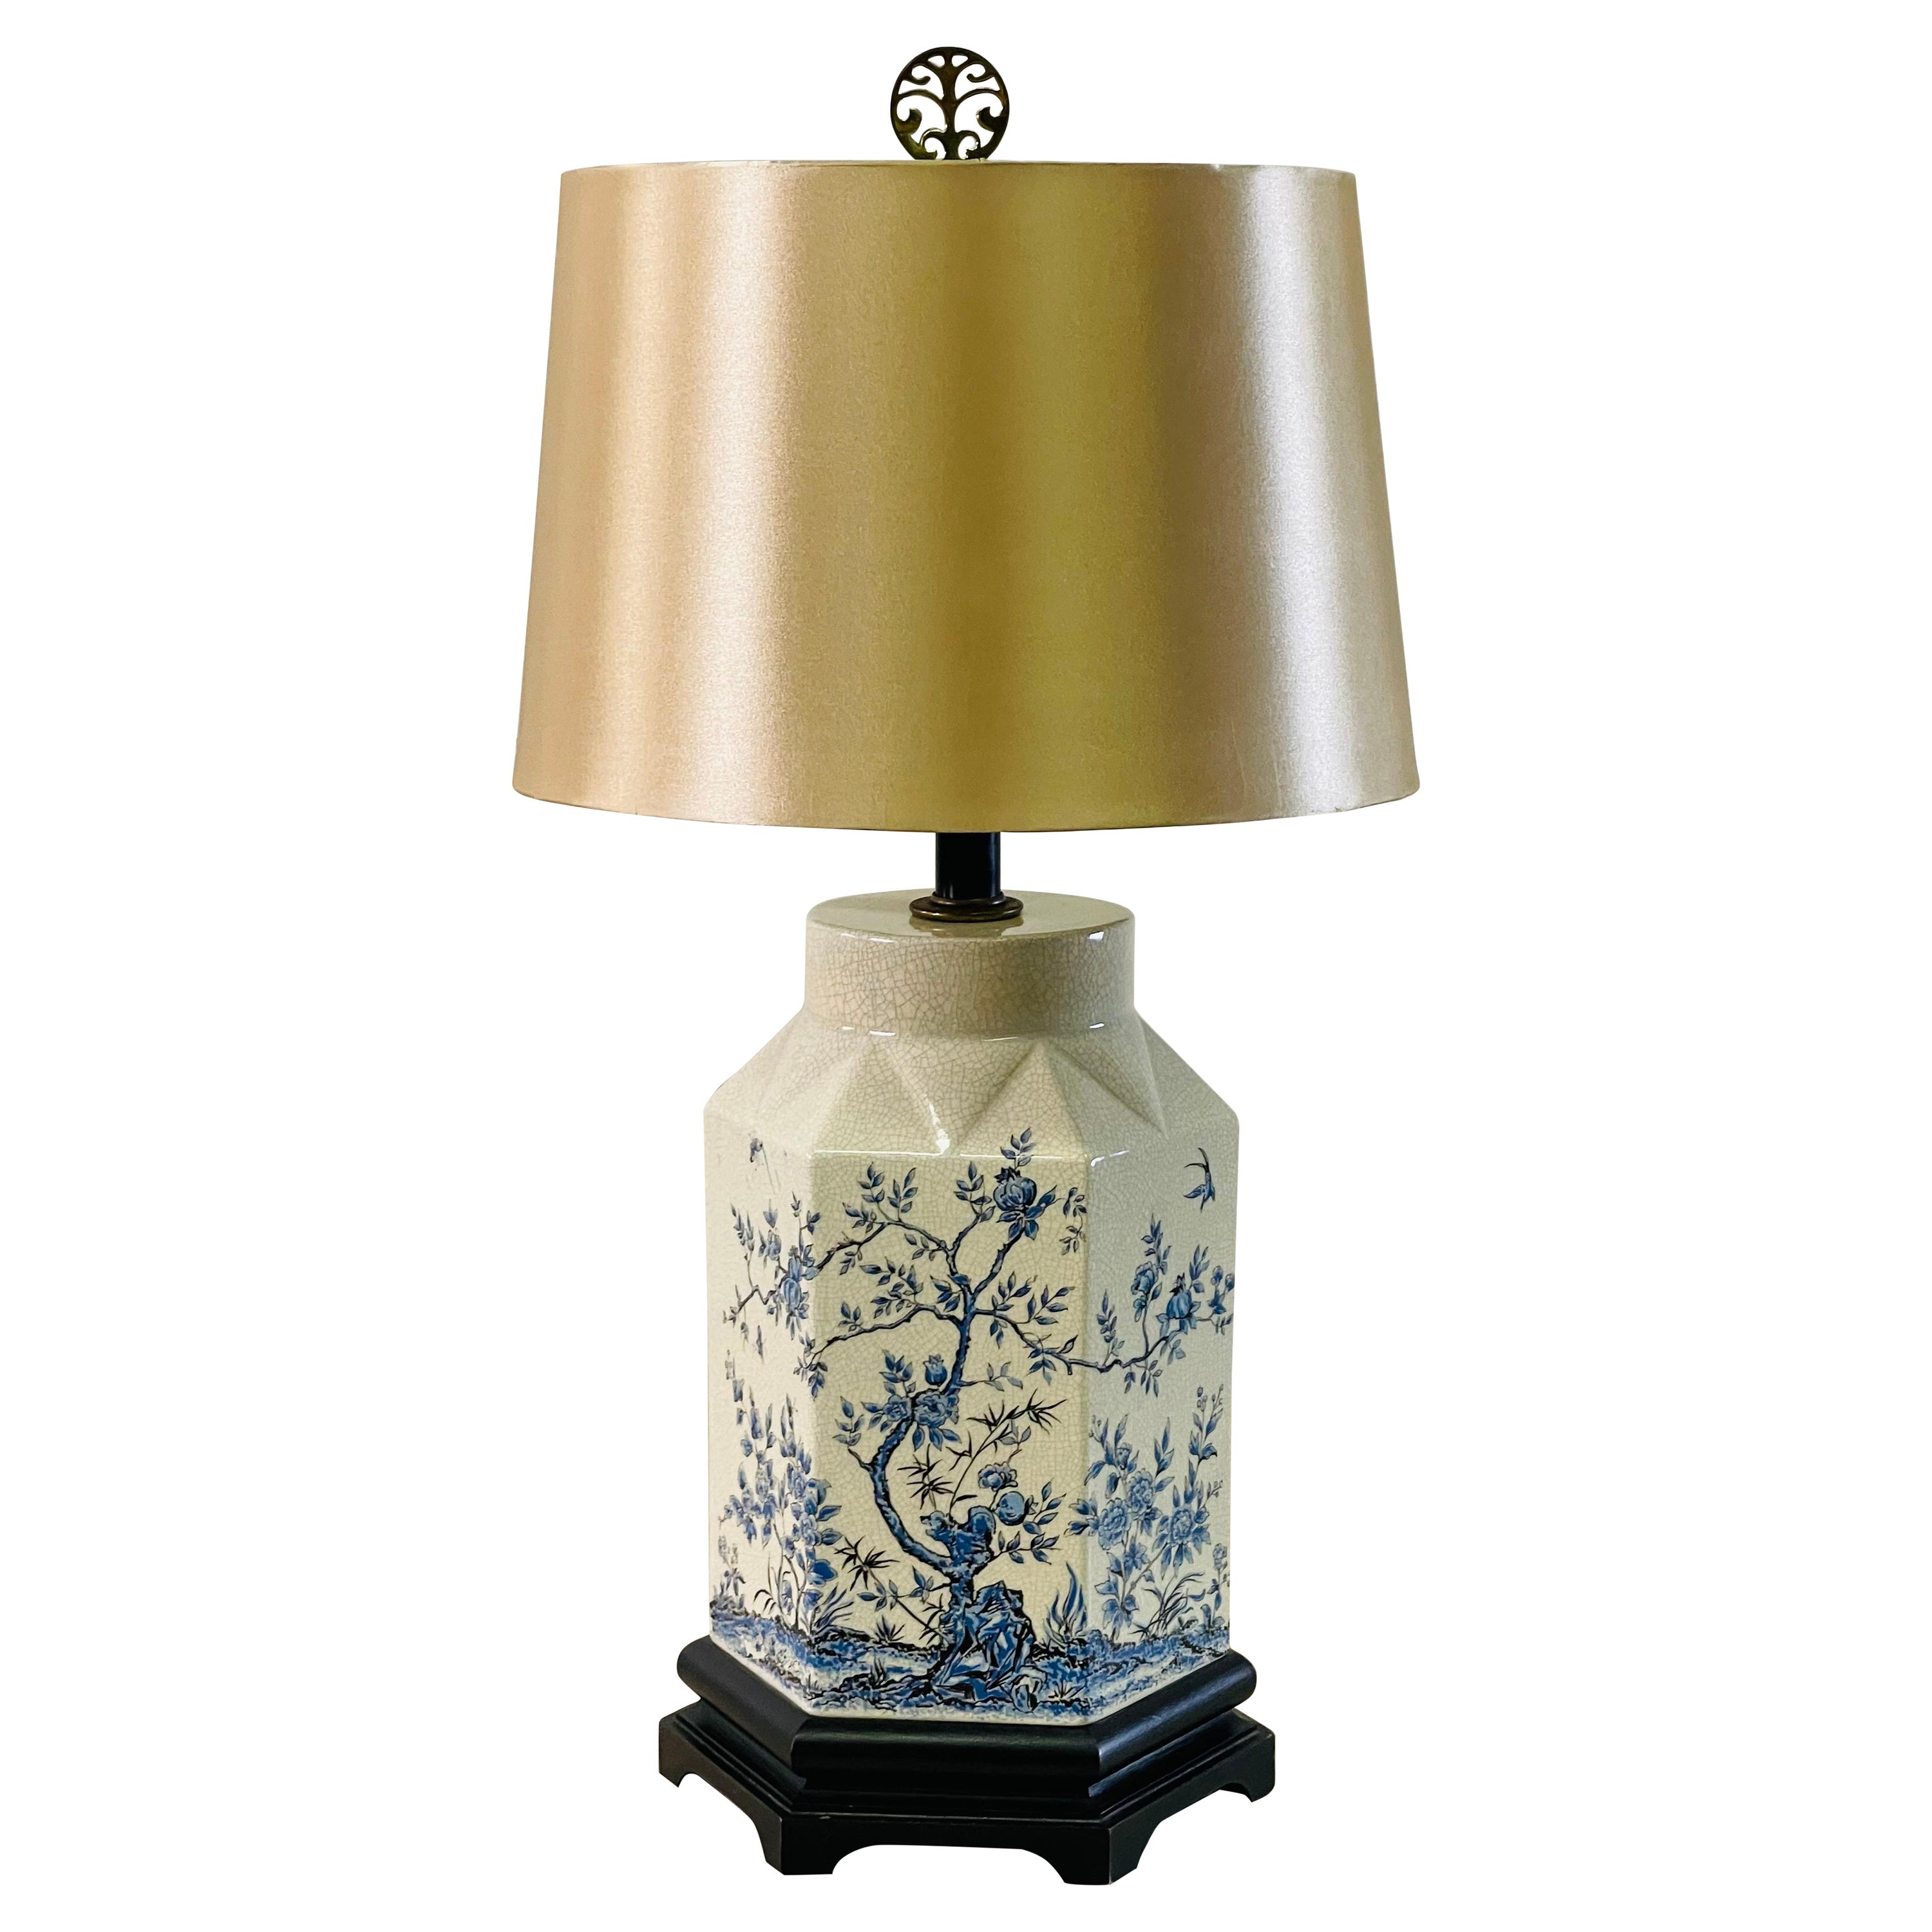 1950s Chinoiserie Blue & White Crackle Ceramic Table Lamp